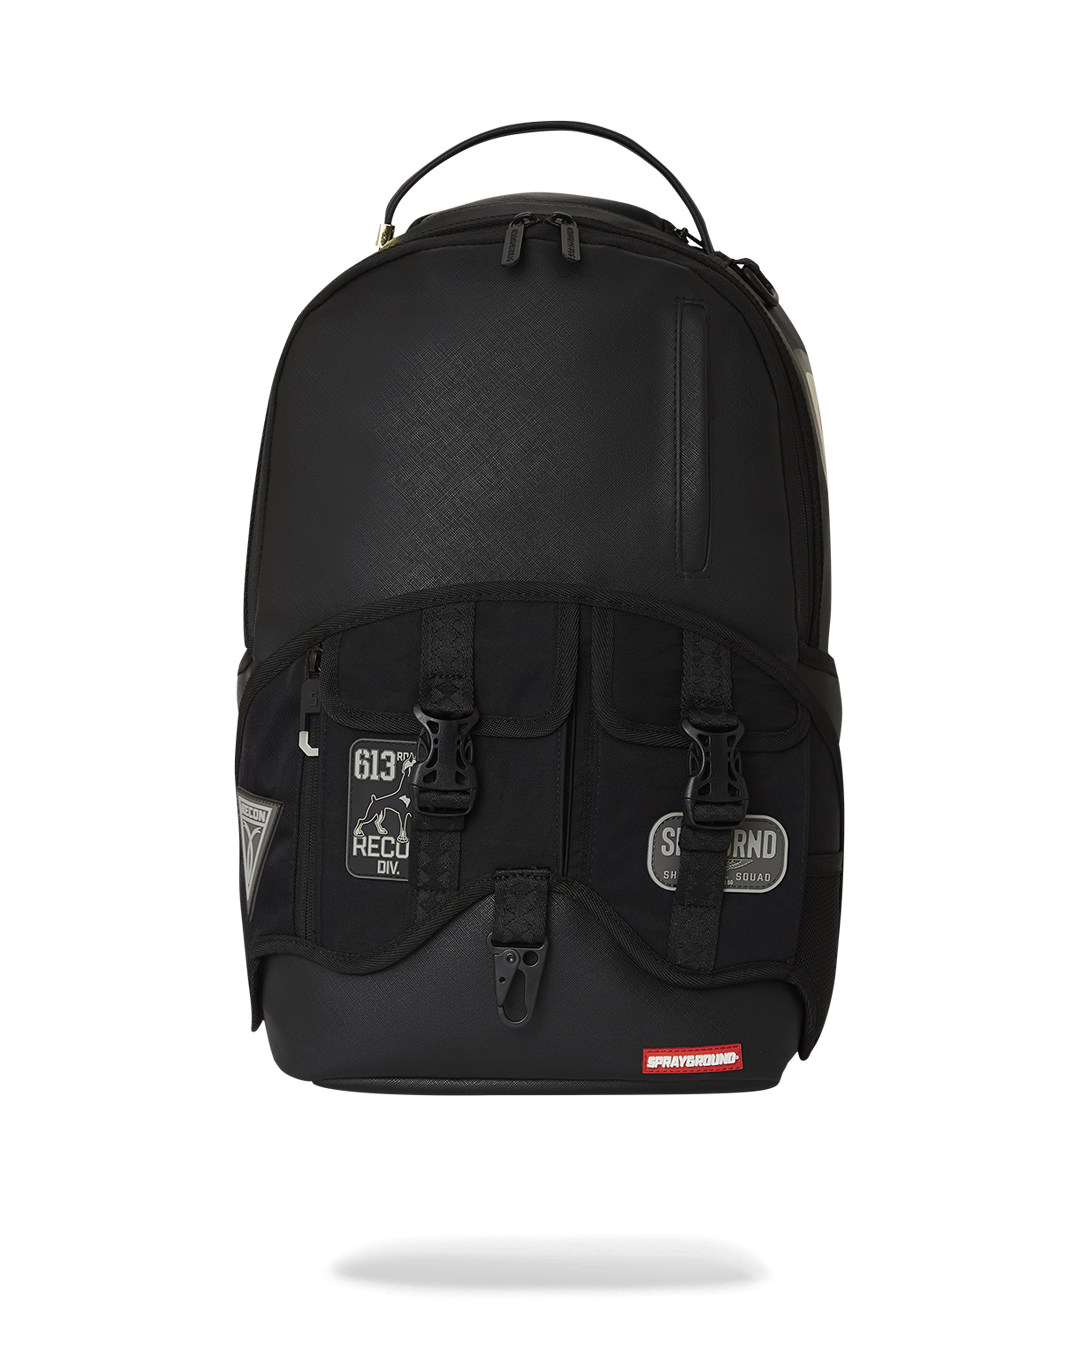 100% authentic,Sprayground LV design limited edition leather backpack,  Men's Fashion, Bags, Backpacks on Carousell